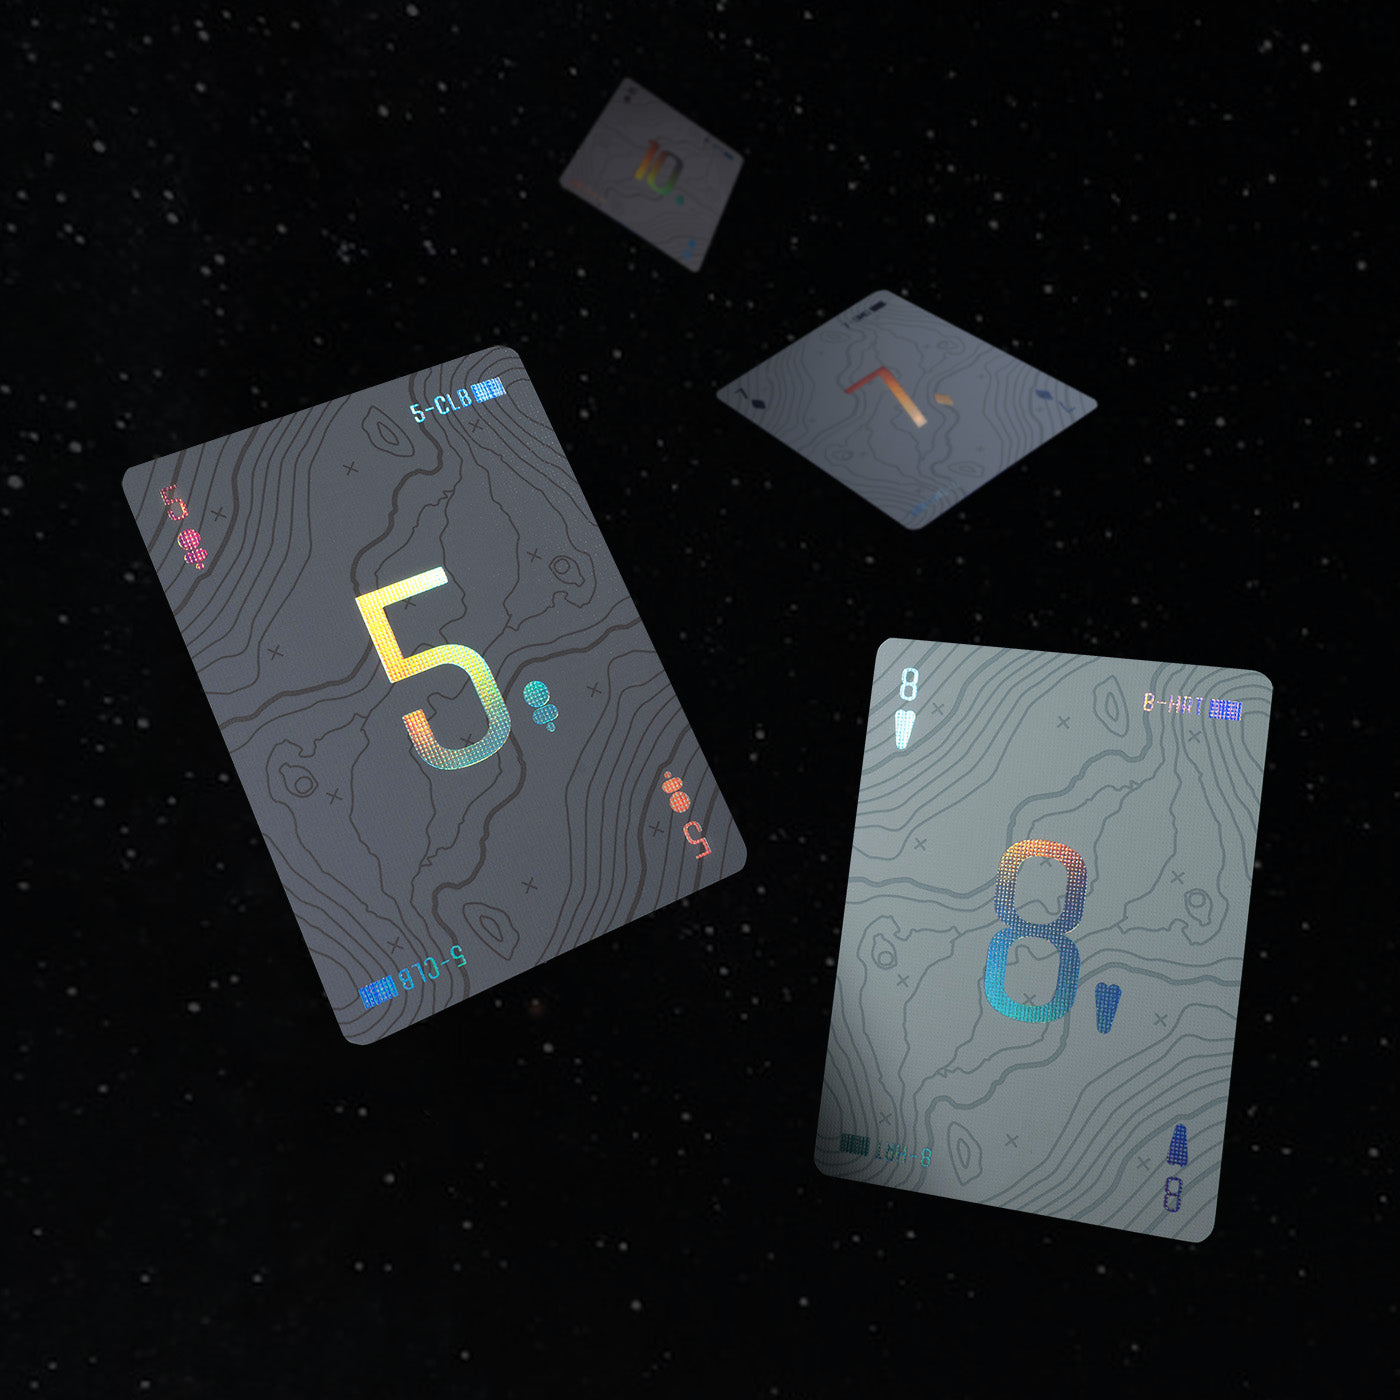 Four playing cards floating in space